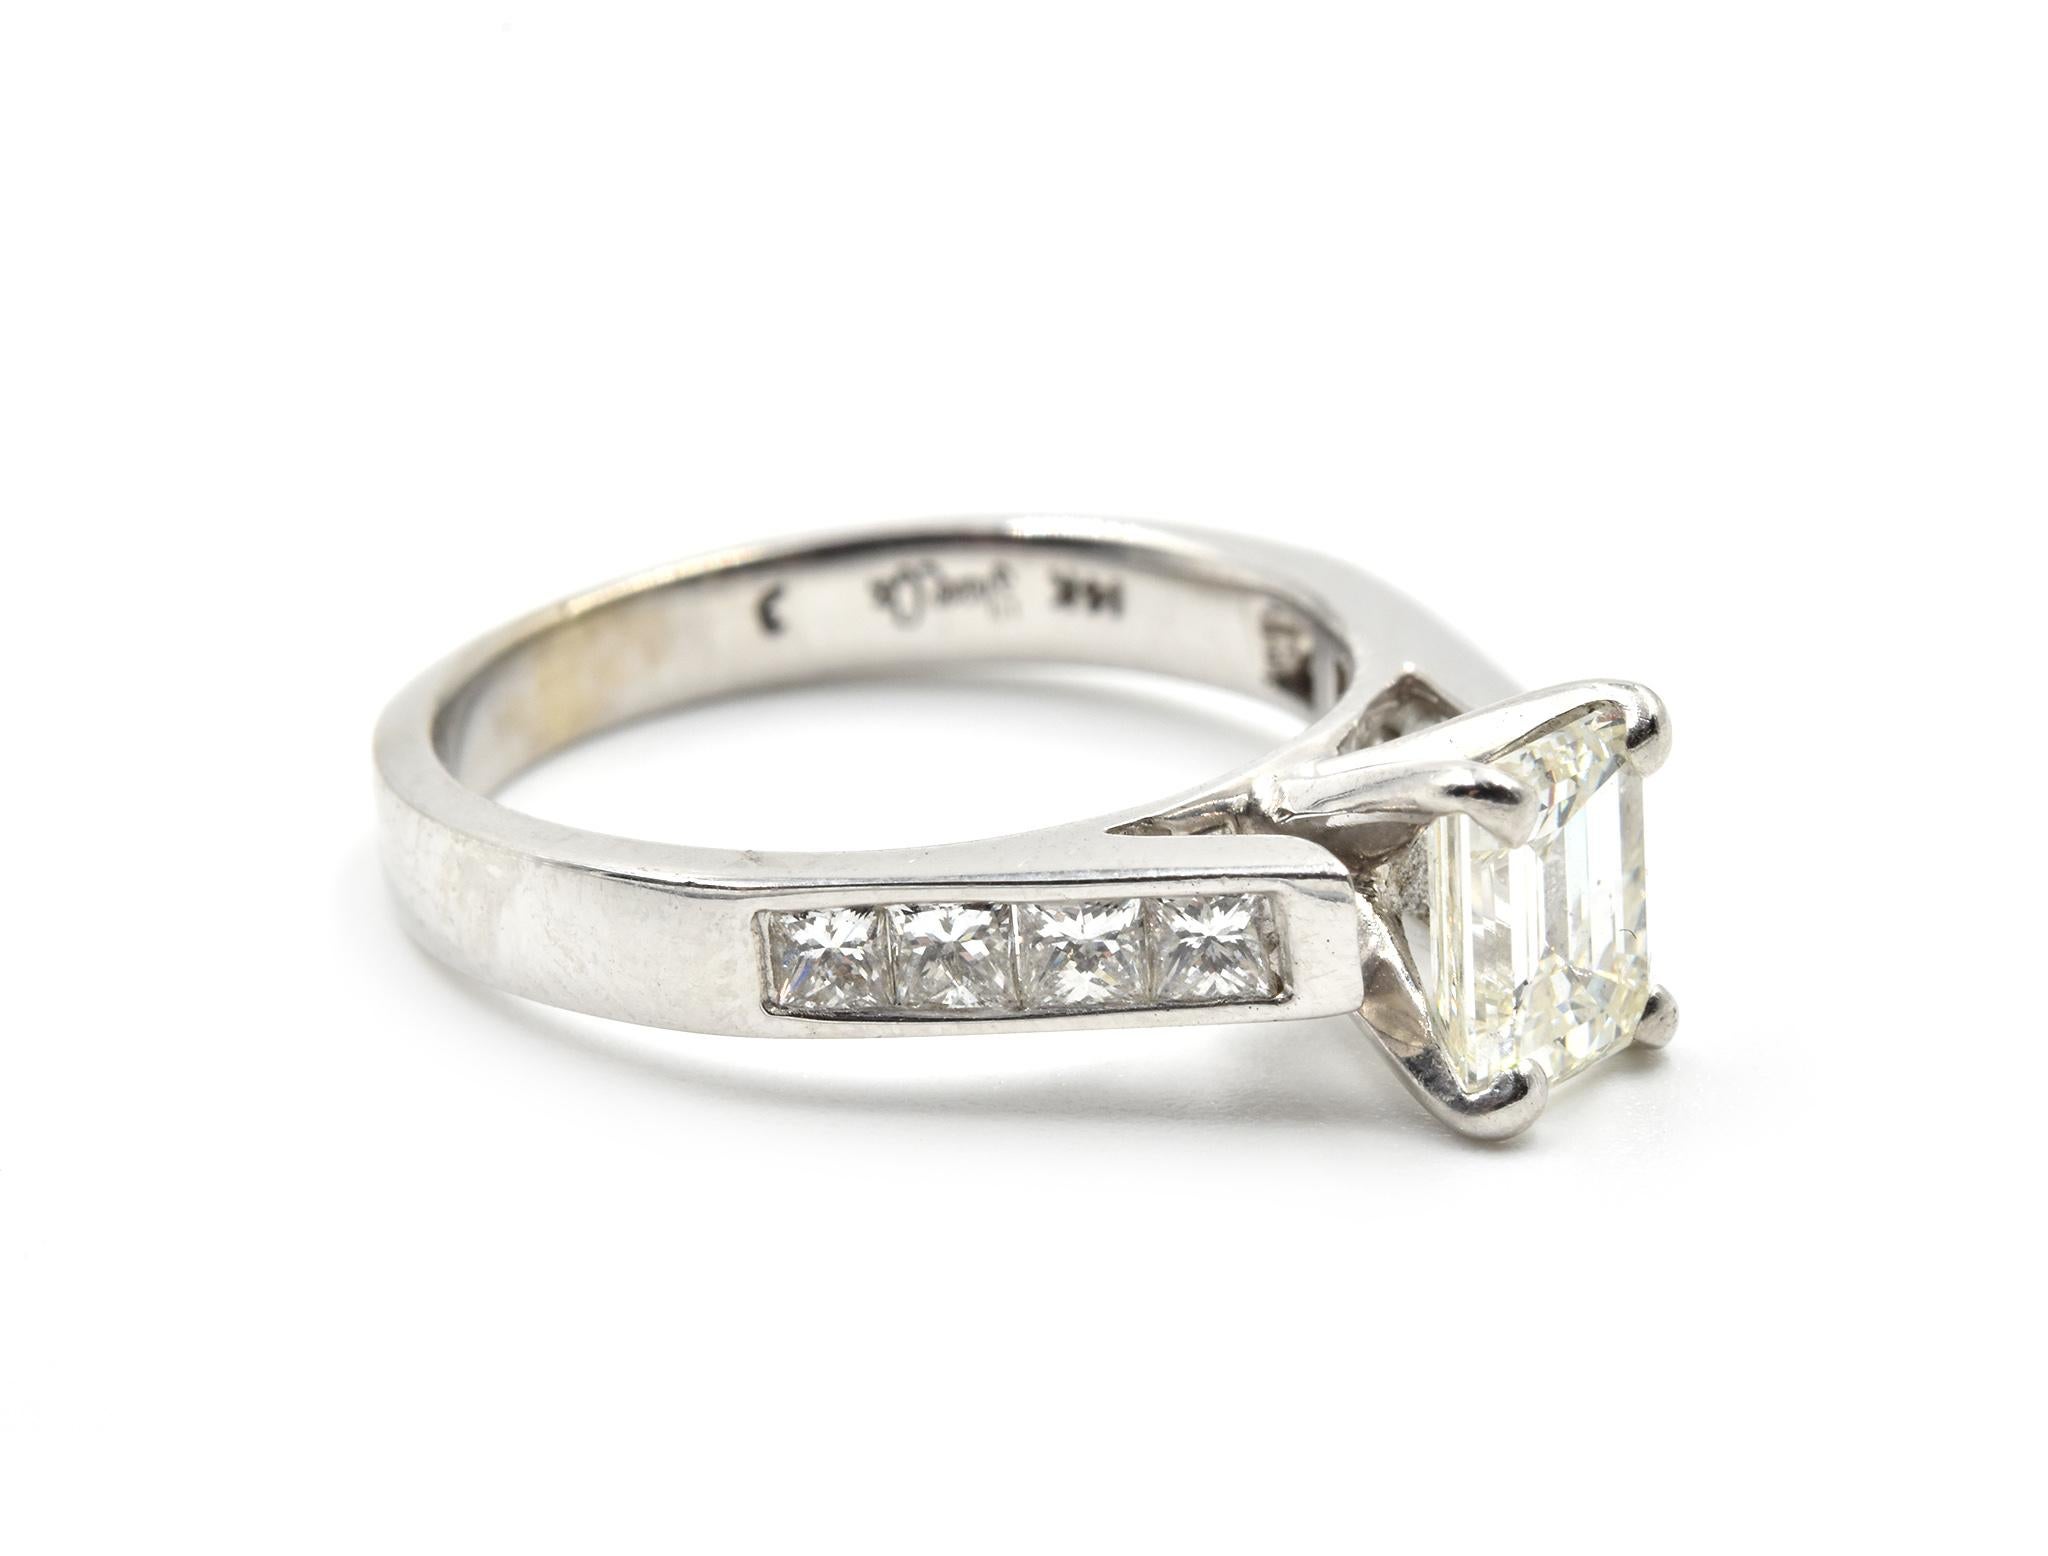 The center stone of this wedding set is a 0.95ct emerald cut diamond, the engagement ring and wedding band have princess cut diamonds set in the band. The center stone is graded I in color and VS1 in clarity. The engagement ring has elevated